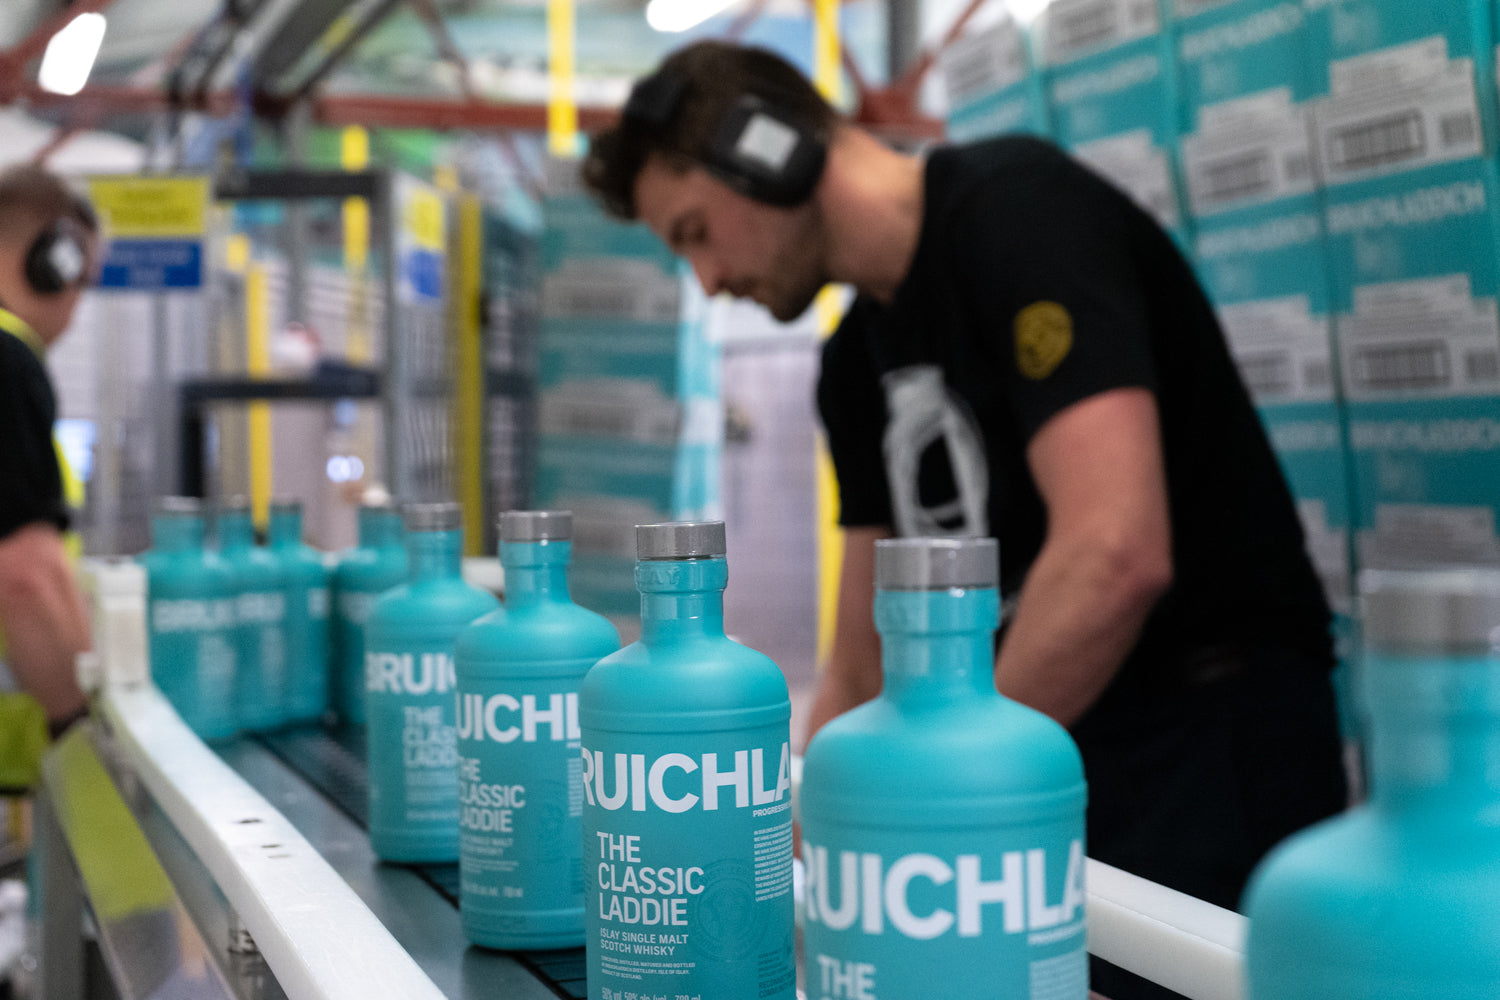 Image of the new Bruichladdich Classic Laddie bottle being prepared in the bottling hall